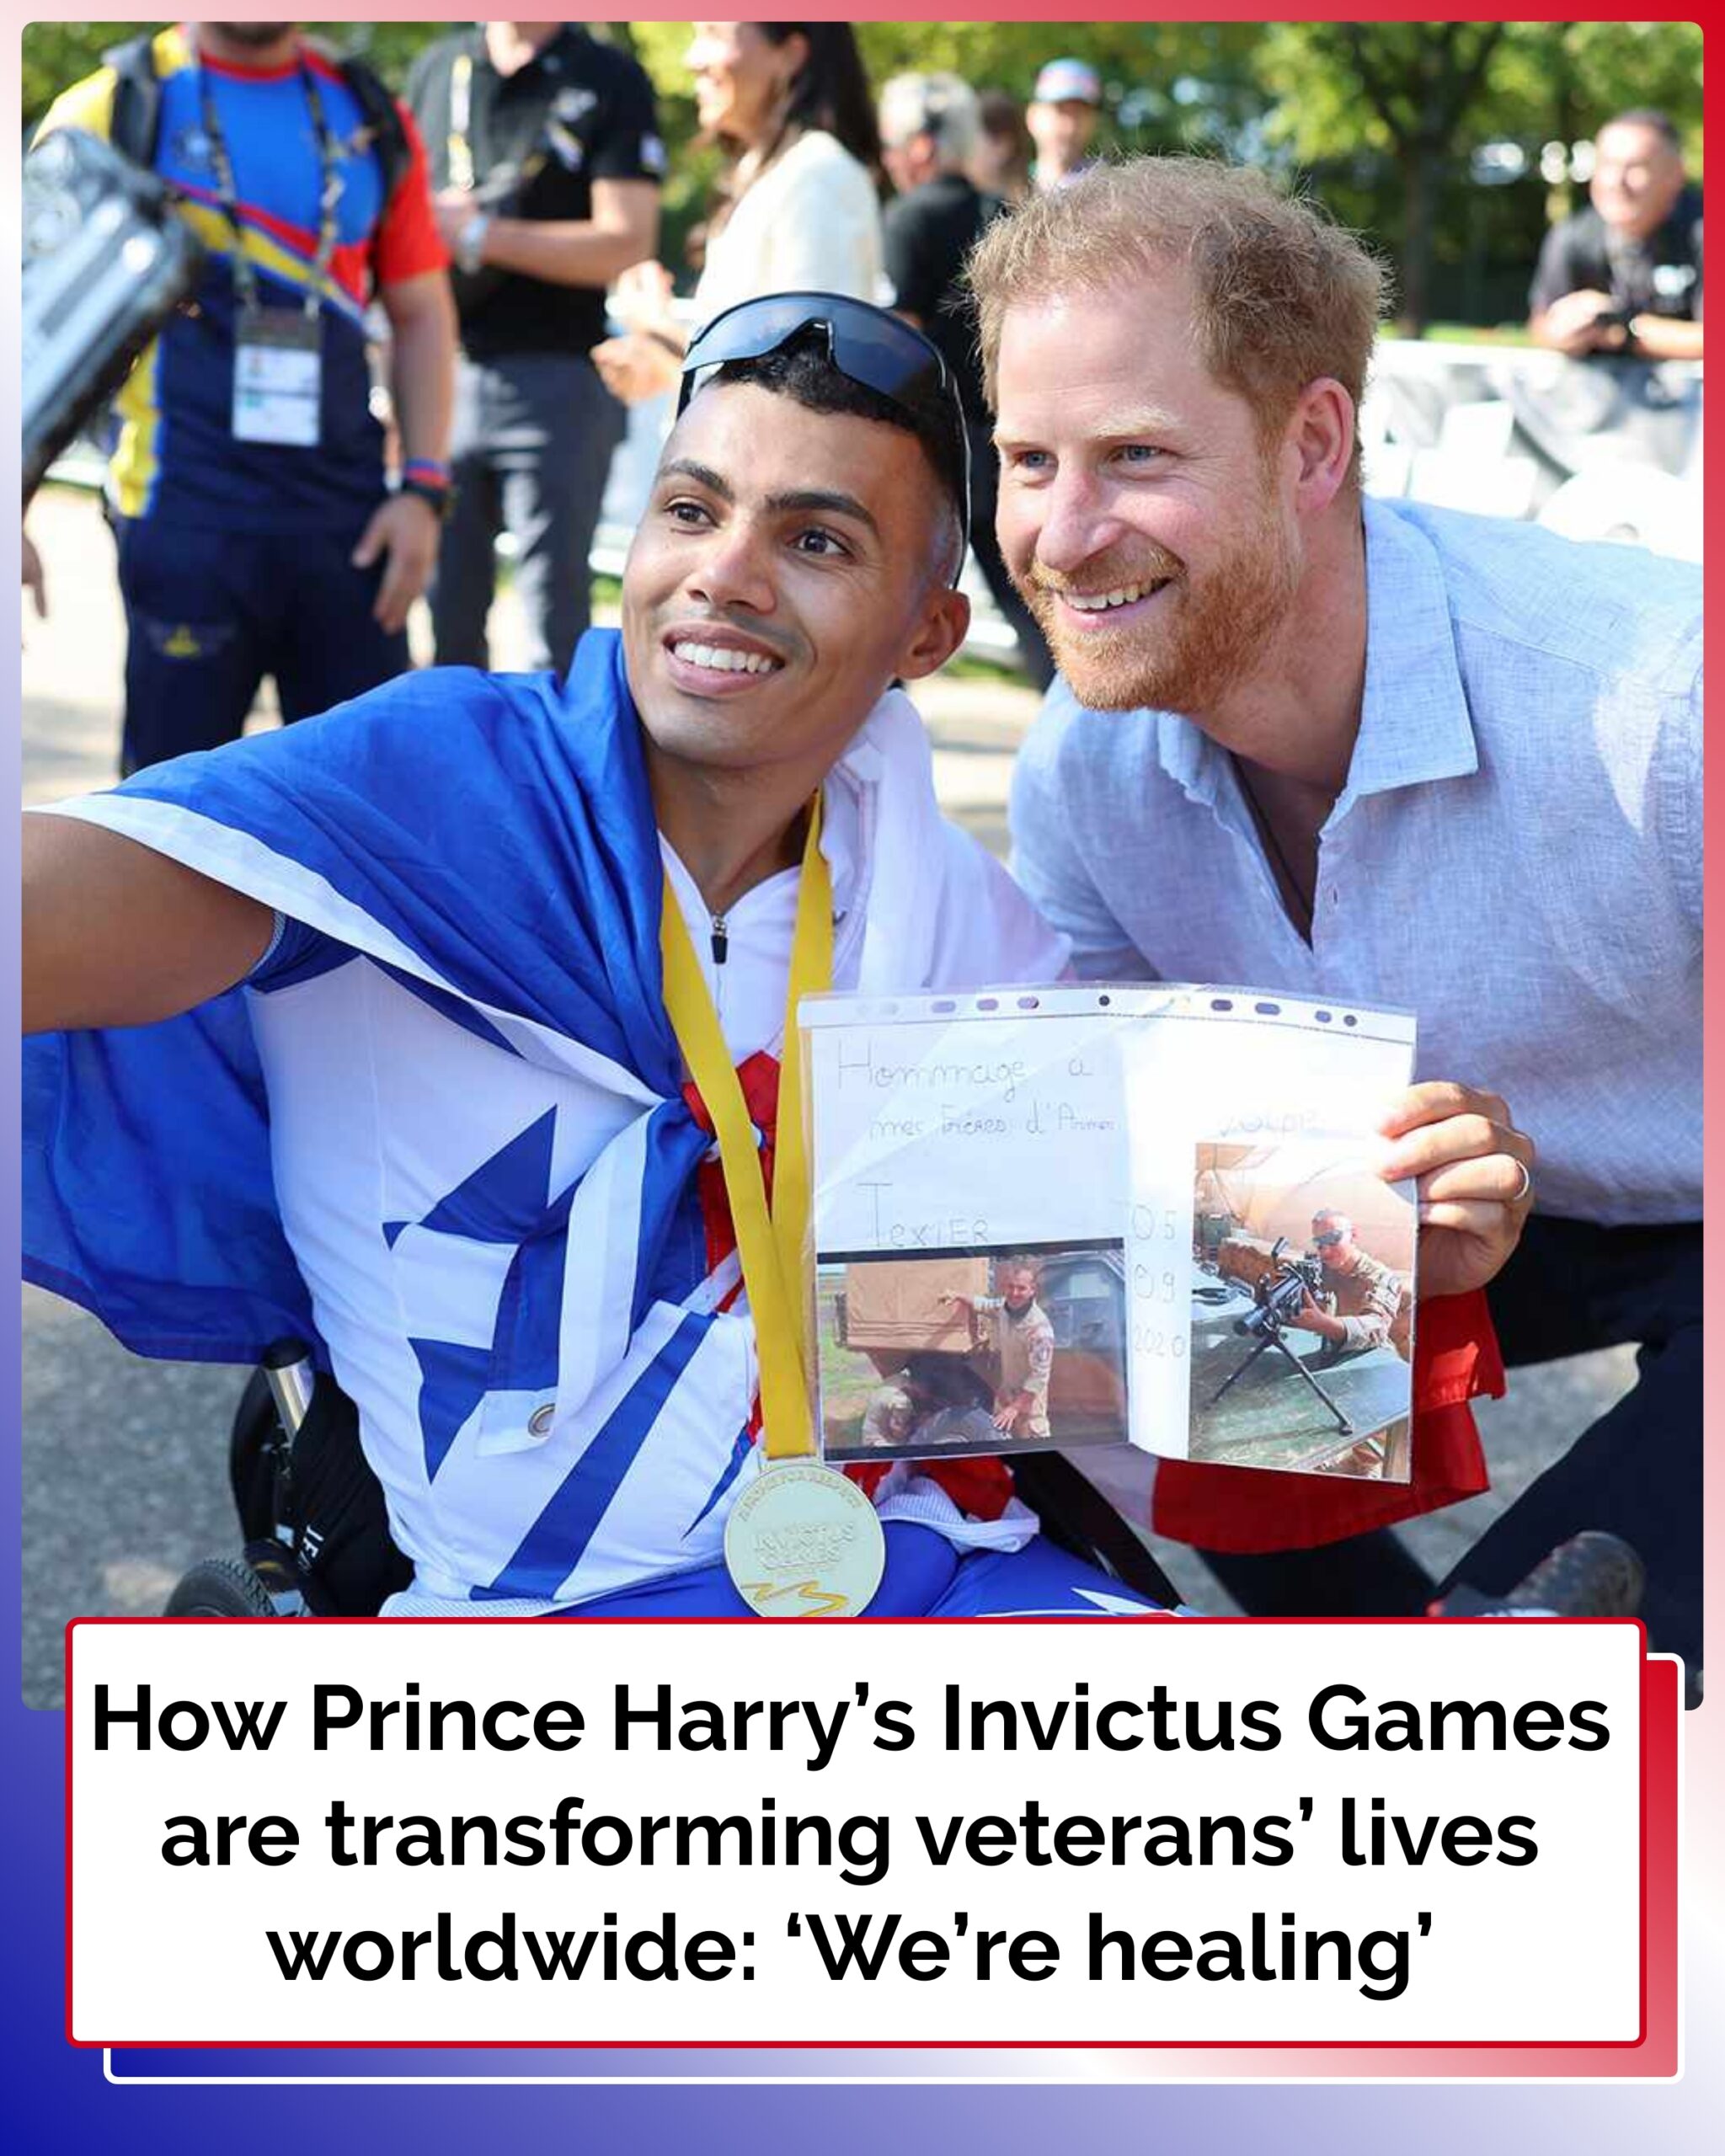 How Prince Harry’s Invictus Games Are Transforming Veterans’ Lives Worldwide: ‘We’re Healing’